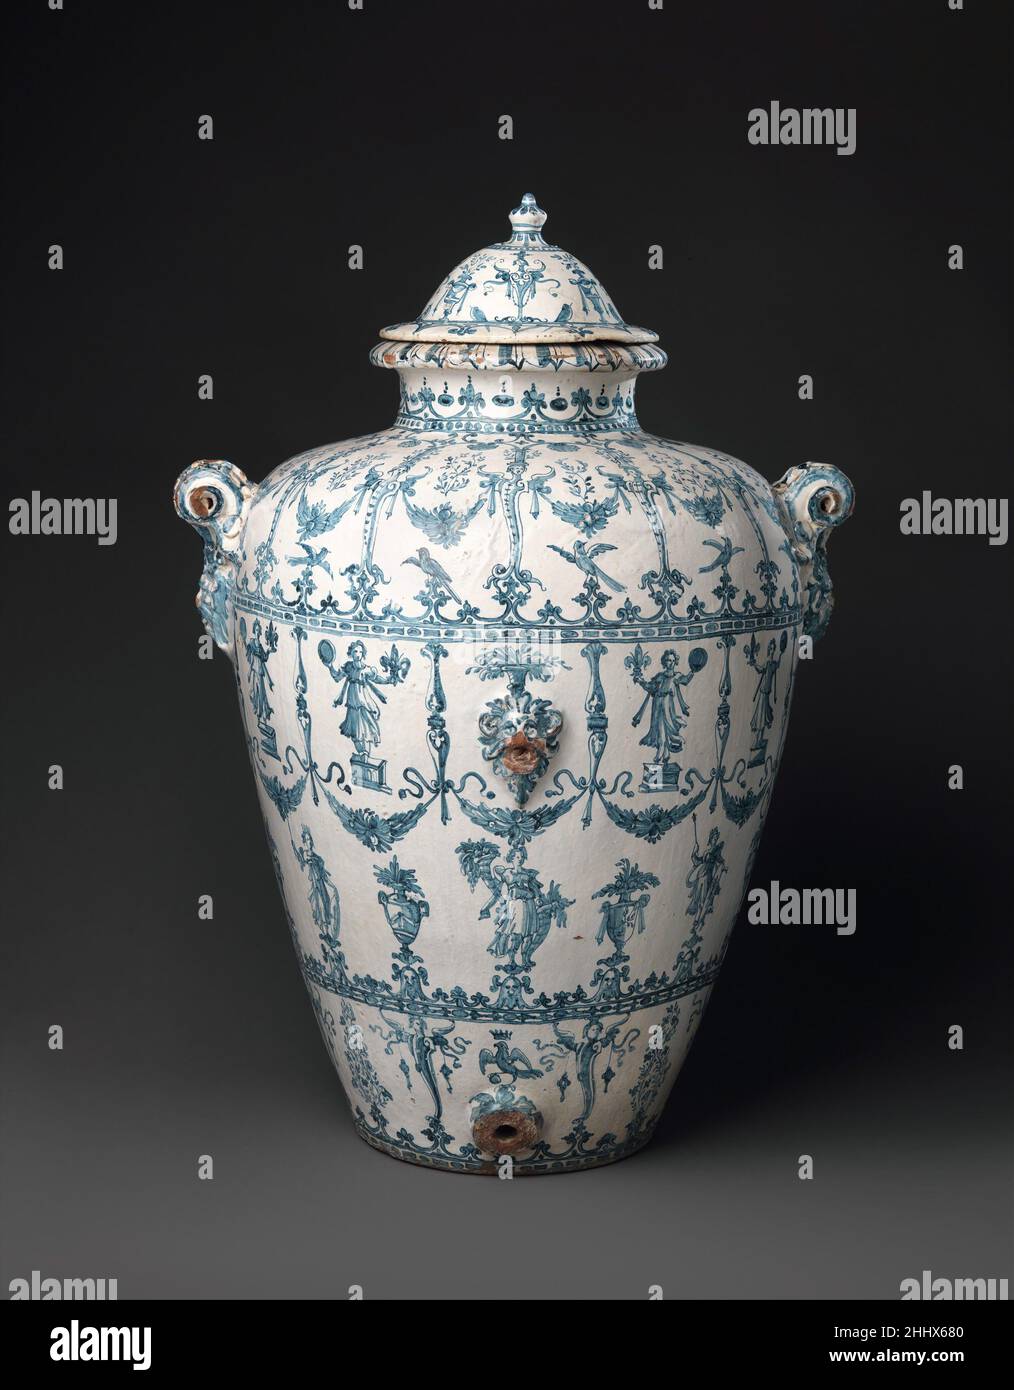 Wine jar (Orcio da vino) ca. 1597–1620 workshop of the Marmi family The only known examples of Montelupo ware with monochrome blue decoration on a near-white ground. That combination recalls the porcelain that had been the pride of Grand Duke Francesco I de’ Medici in Florence. Bernardo Buontalenti was in charge of that enterprise. These large jars, therefore, represent a prolongation of that local tradition, even though the material, size, and style differ. The latter can be associated with Buontalenti’s principal pupil, Giulio Parigi, who also worked for the Medici. Hence we are tempted to c Stock Photo